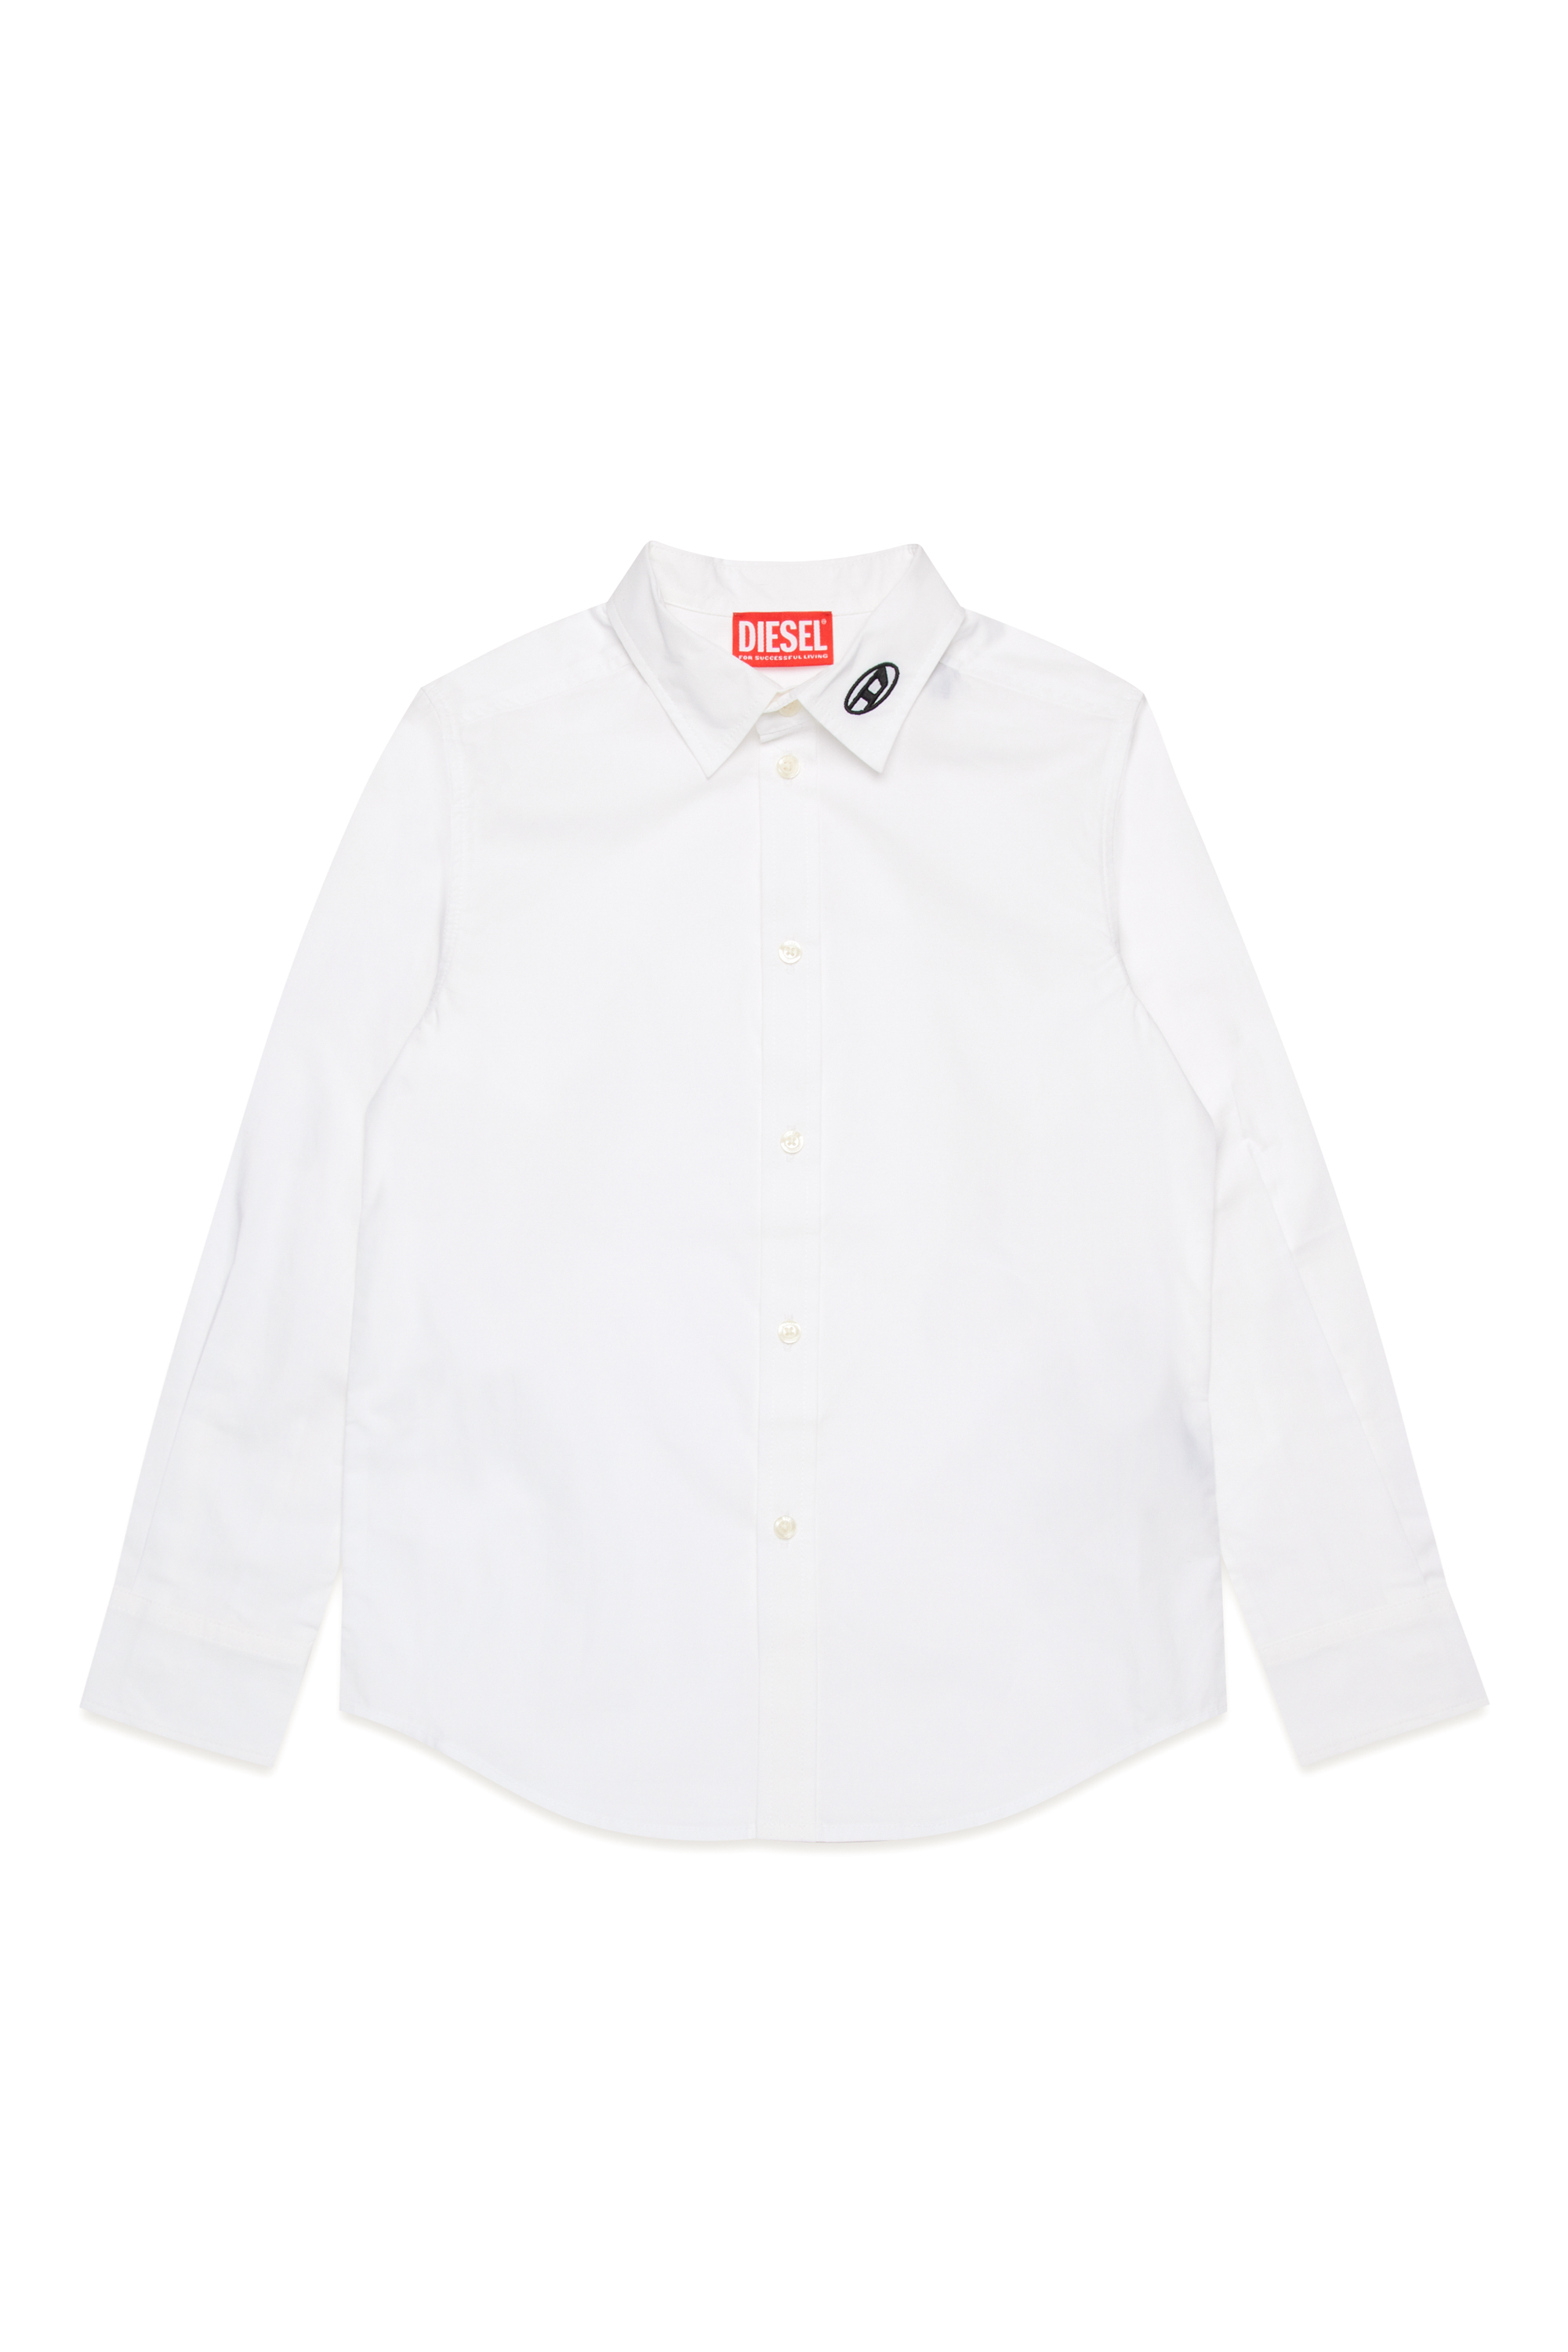 Diesel - CPINGO, Man Long-sleeve shirt with Oval D embroidery in White - Image 1